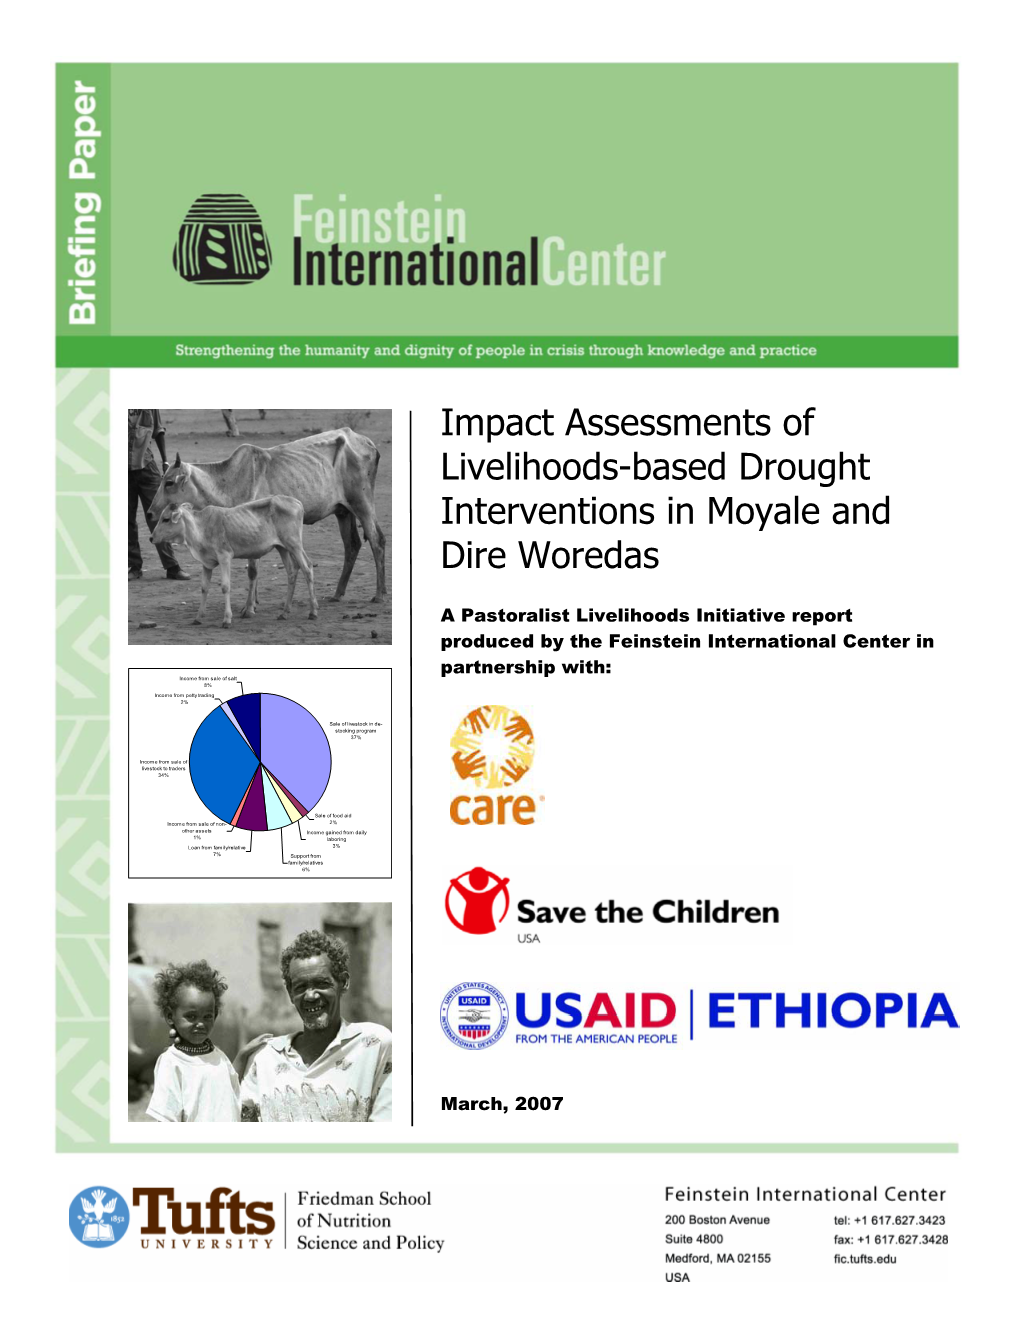 Impact Assessments of Livelihoods-Based Drought Interventions in Moyale and Dire Woredas